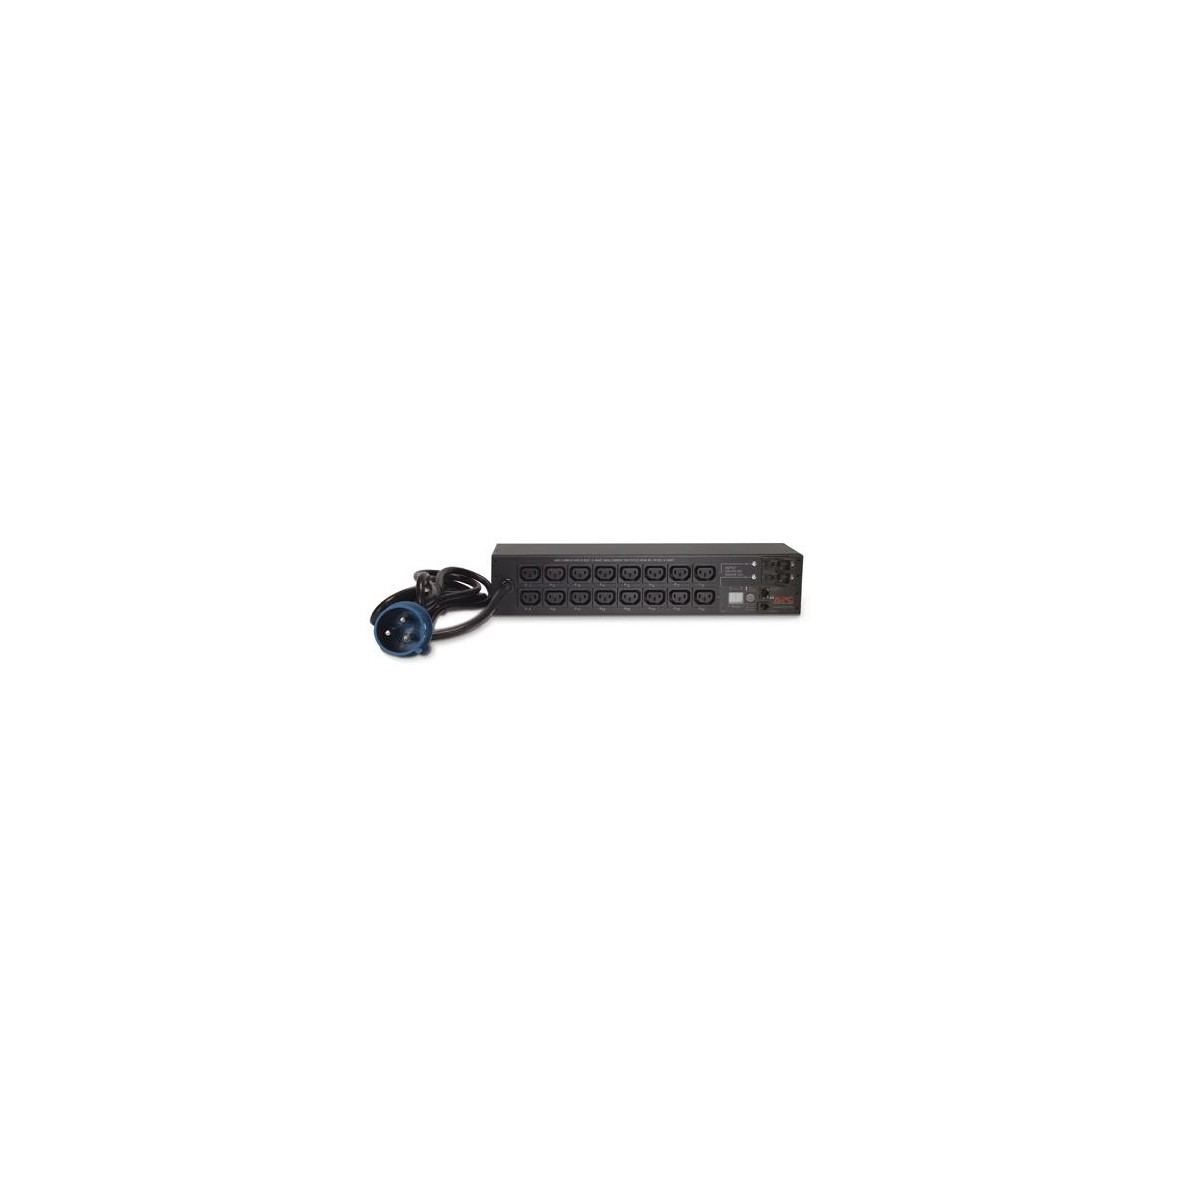 APC AP7922B - Metered - Switched - 2U - Single-phase - Horizontal - Black - 16 AC outlet(s)